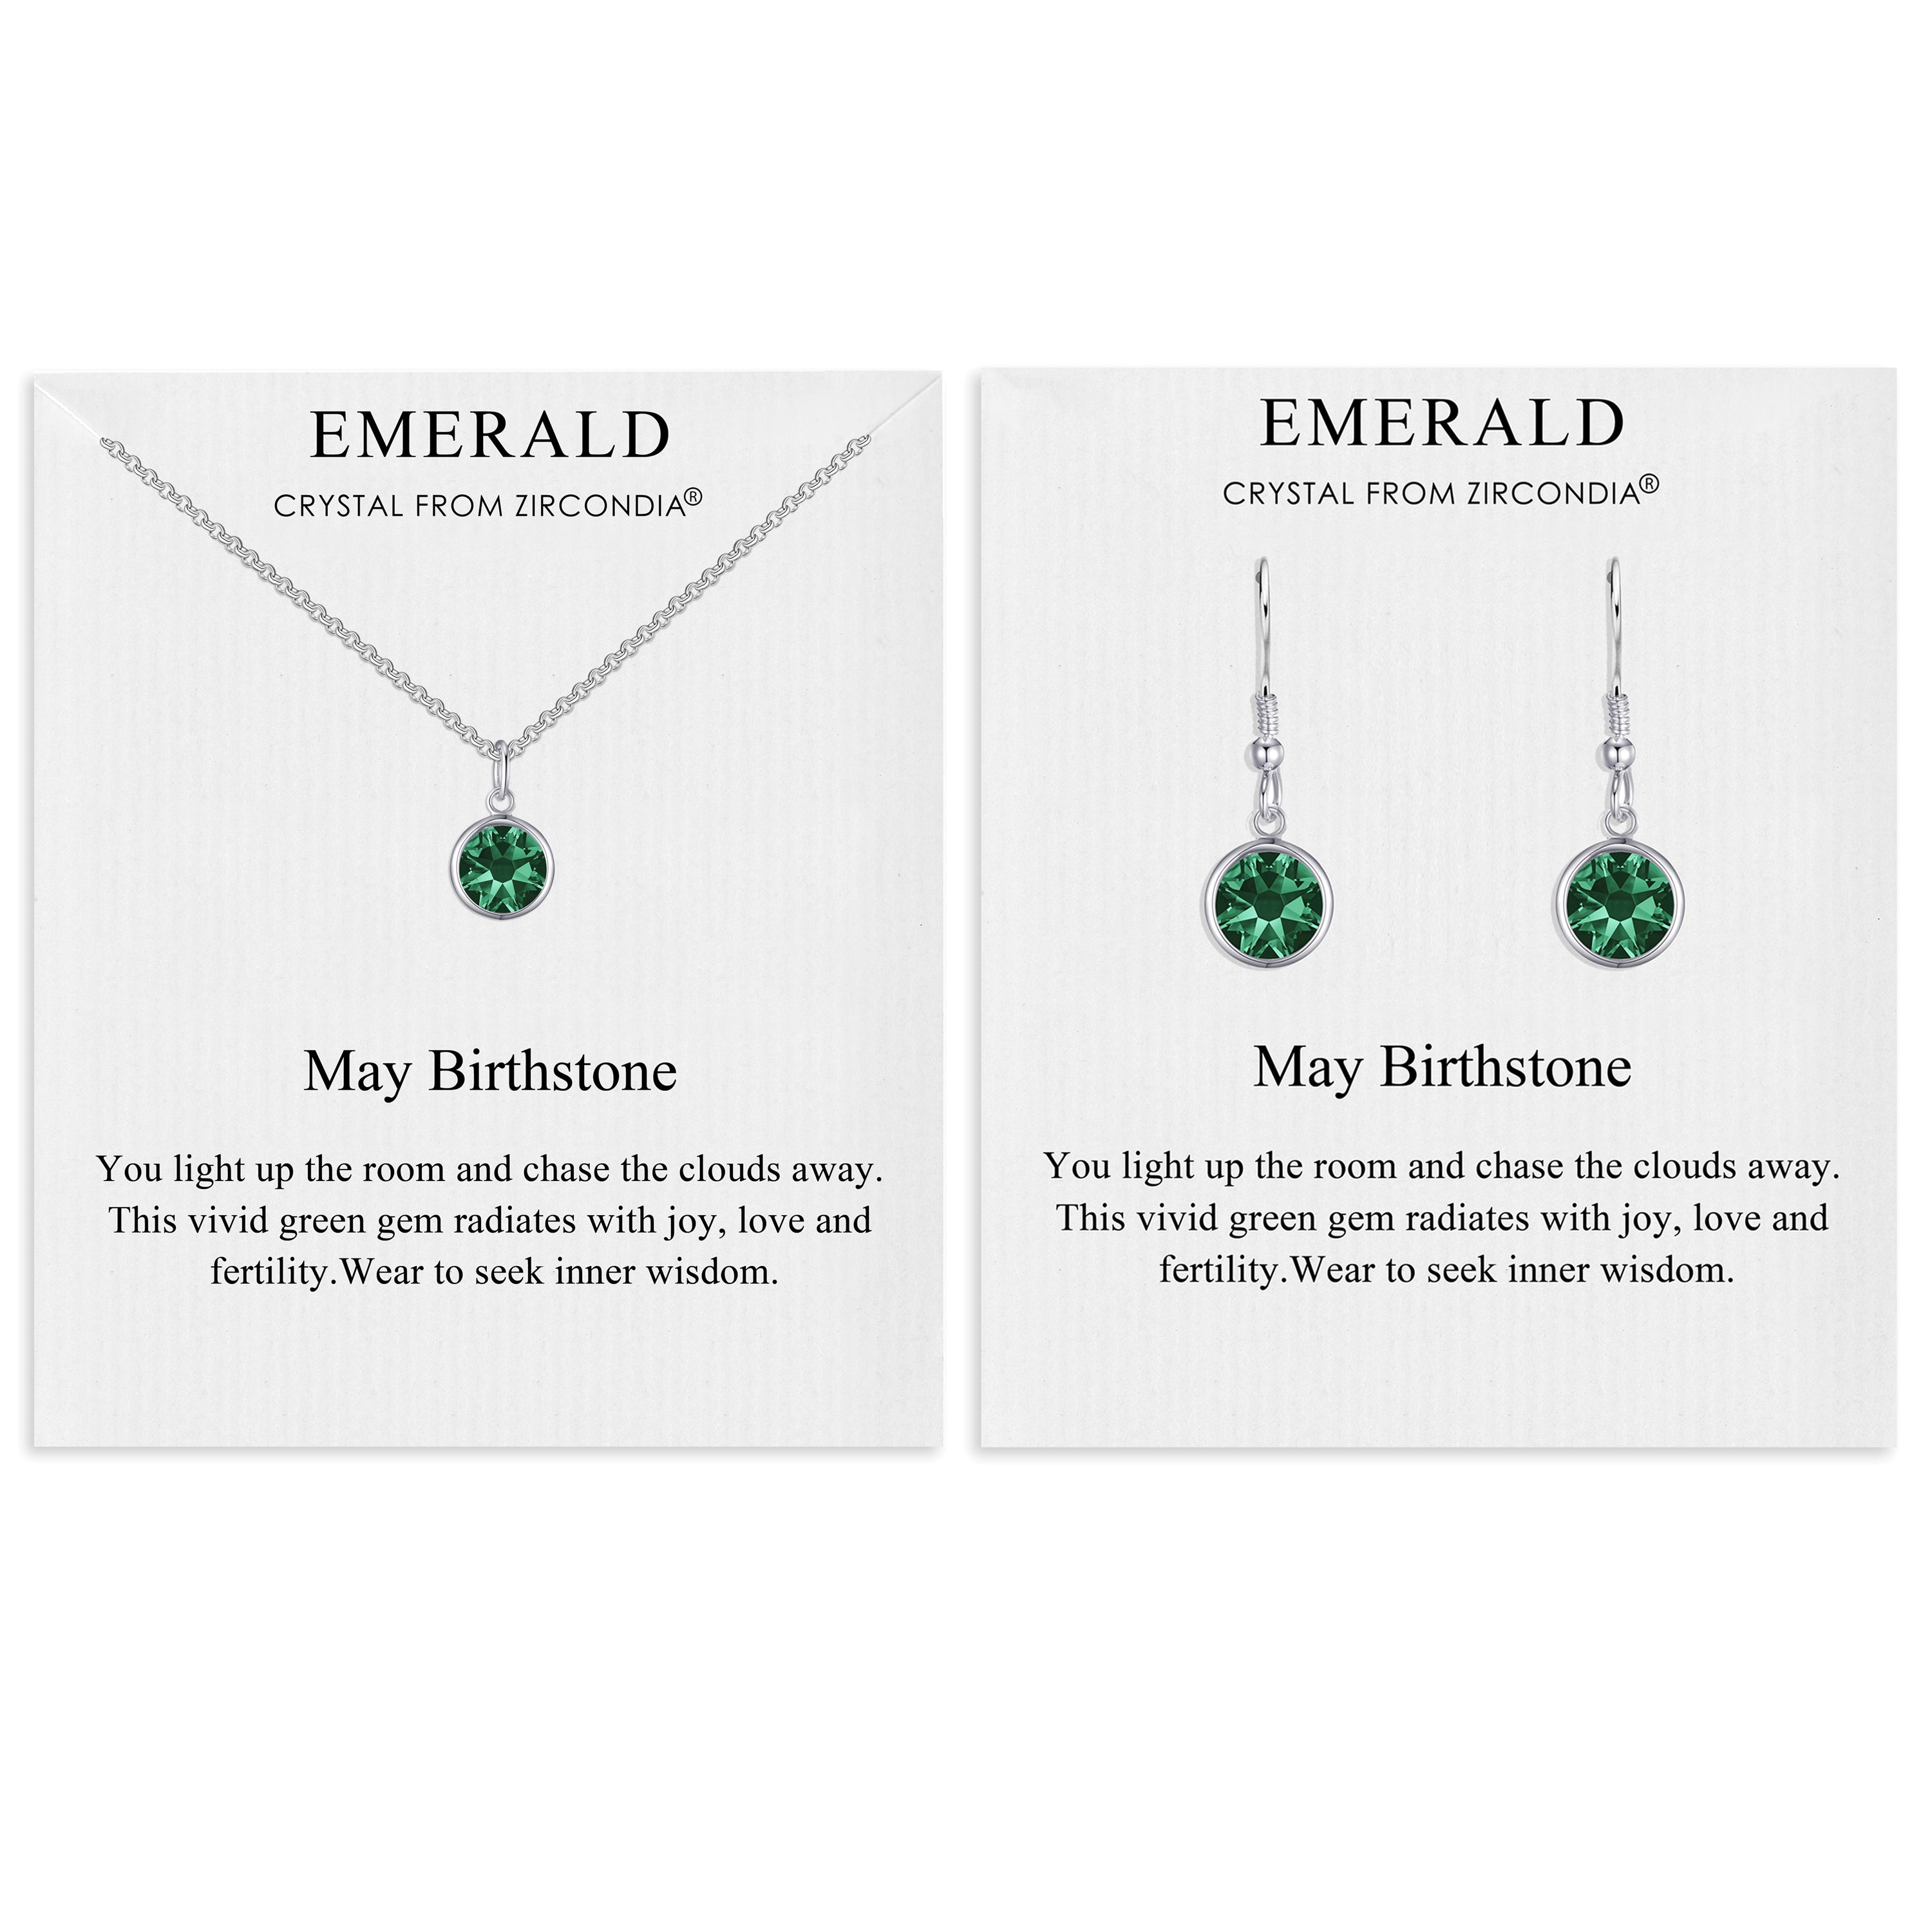 May (Emerald) Birthstone Necklace & Drop Earrings Set Created with Zircondia® Crystals by Philip Jones Jewellery